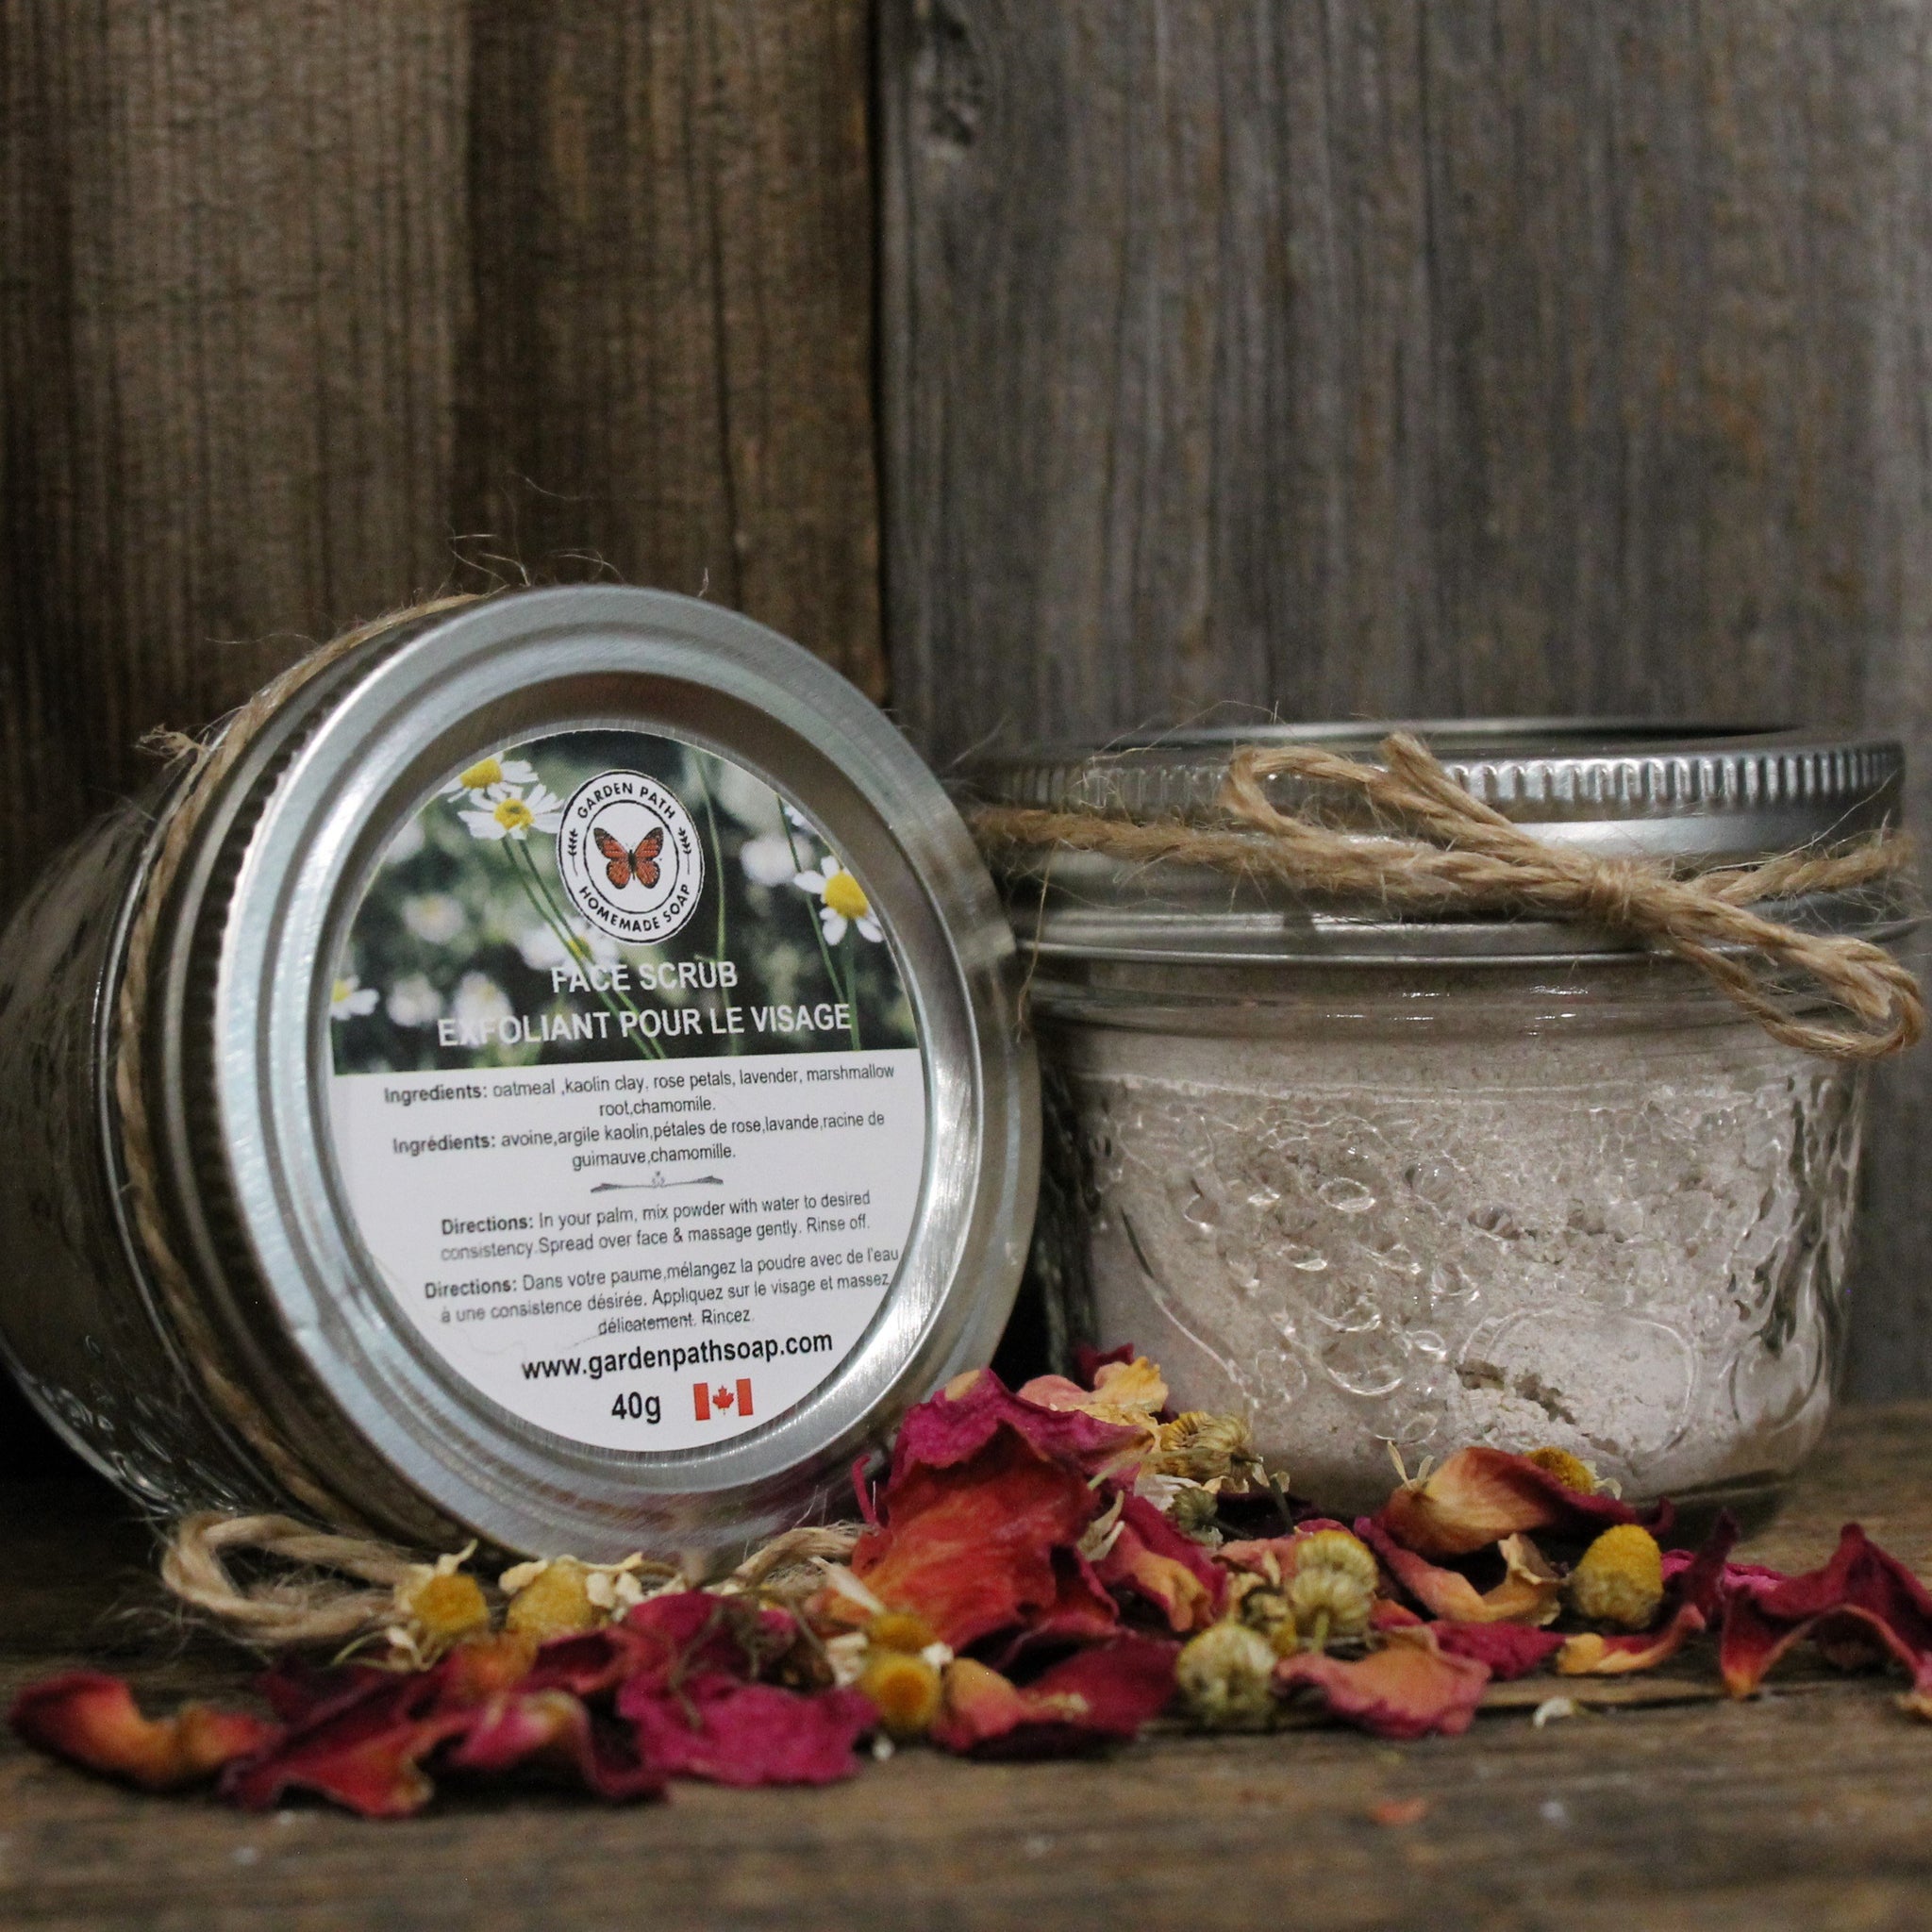 all natural facial scrub using herbs from our gardens